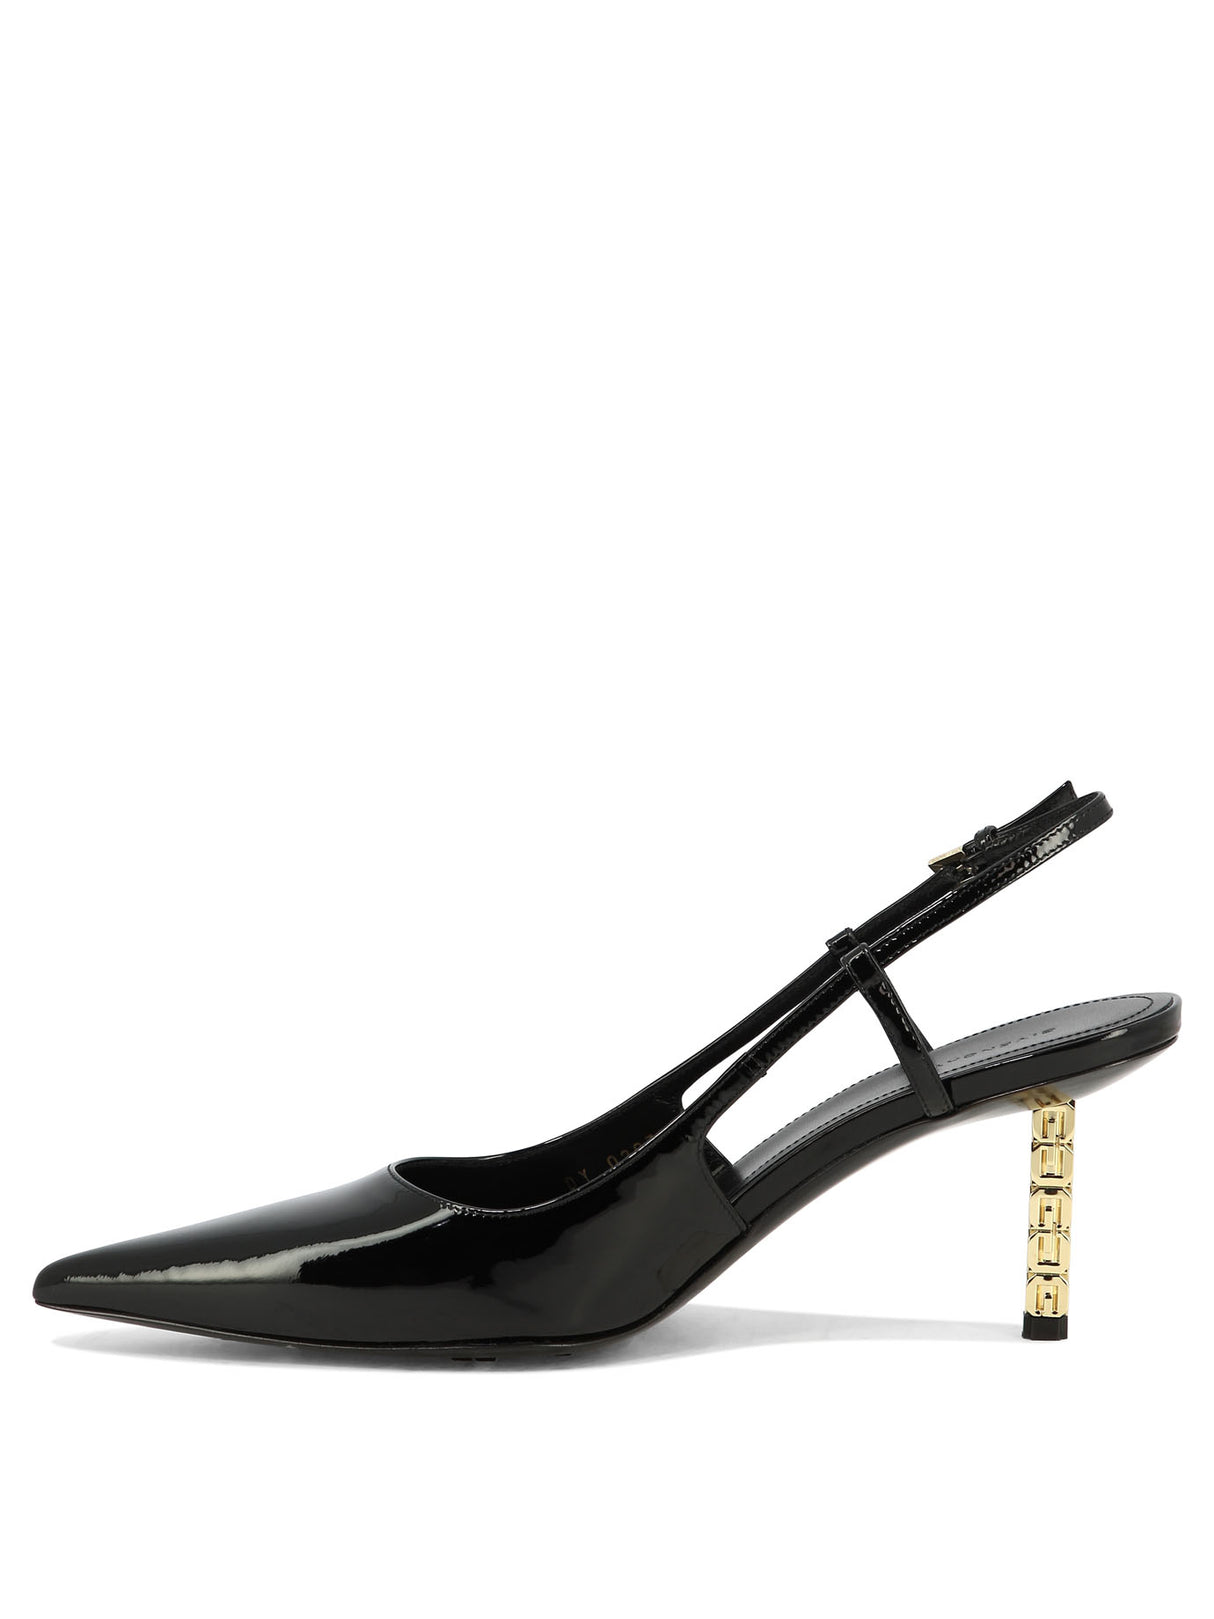 GIVENCHY Sculpted Heel Ankle Strap Pumps for Women in Black